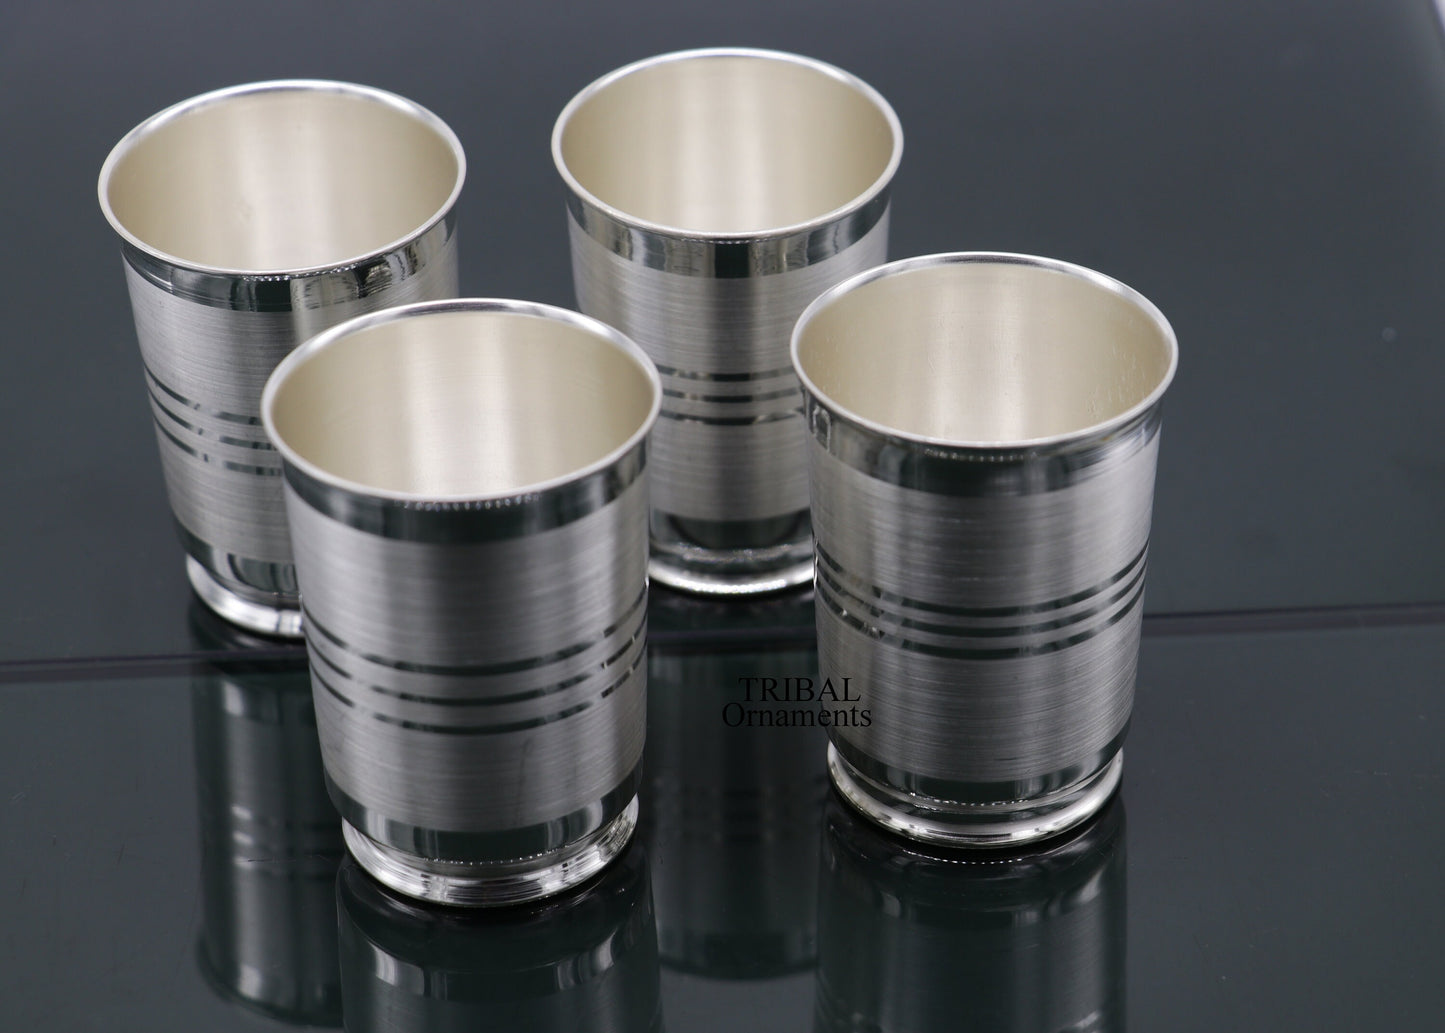 999 pure fine silver handmade water milk cup tumbler, all sizes silver tumbler, silver baby food dining flask, silver utensils gift sv262 - TRIBAL ORNAMENTS